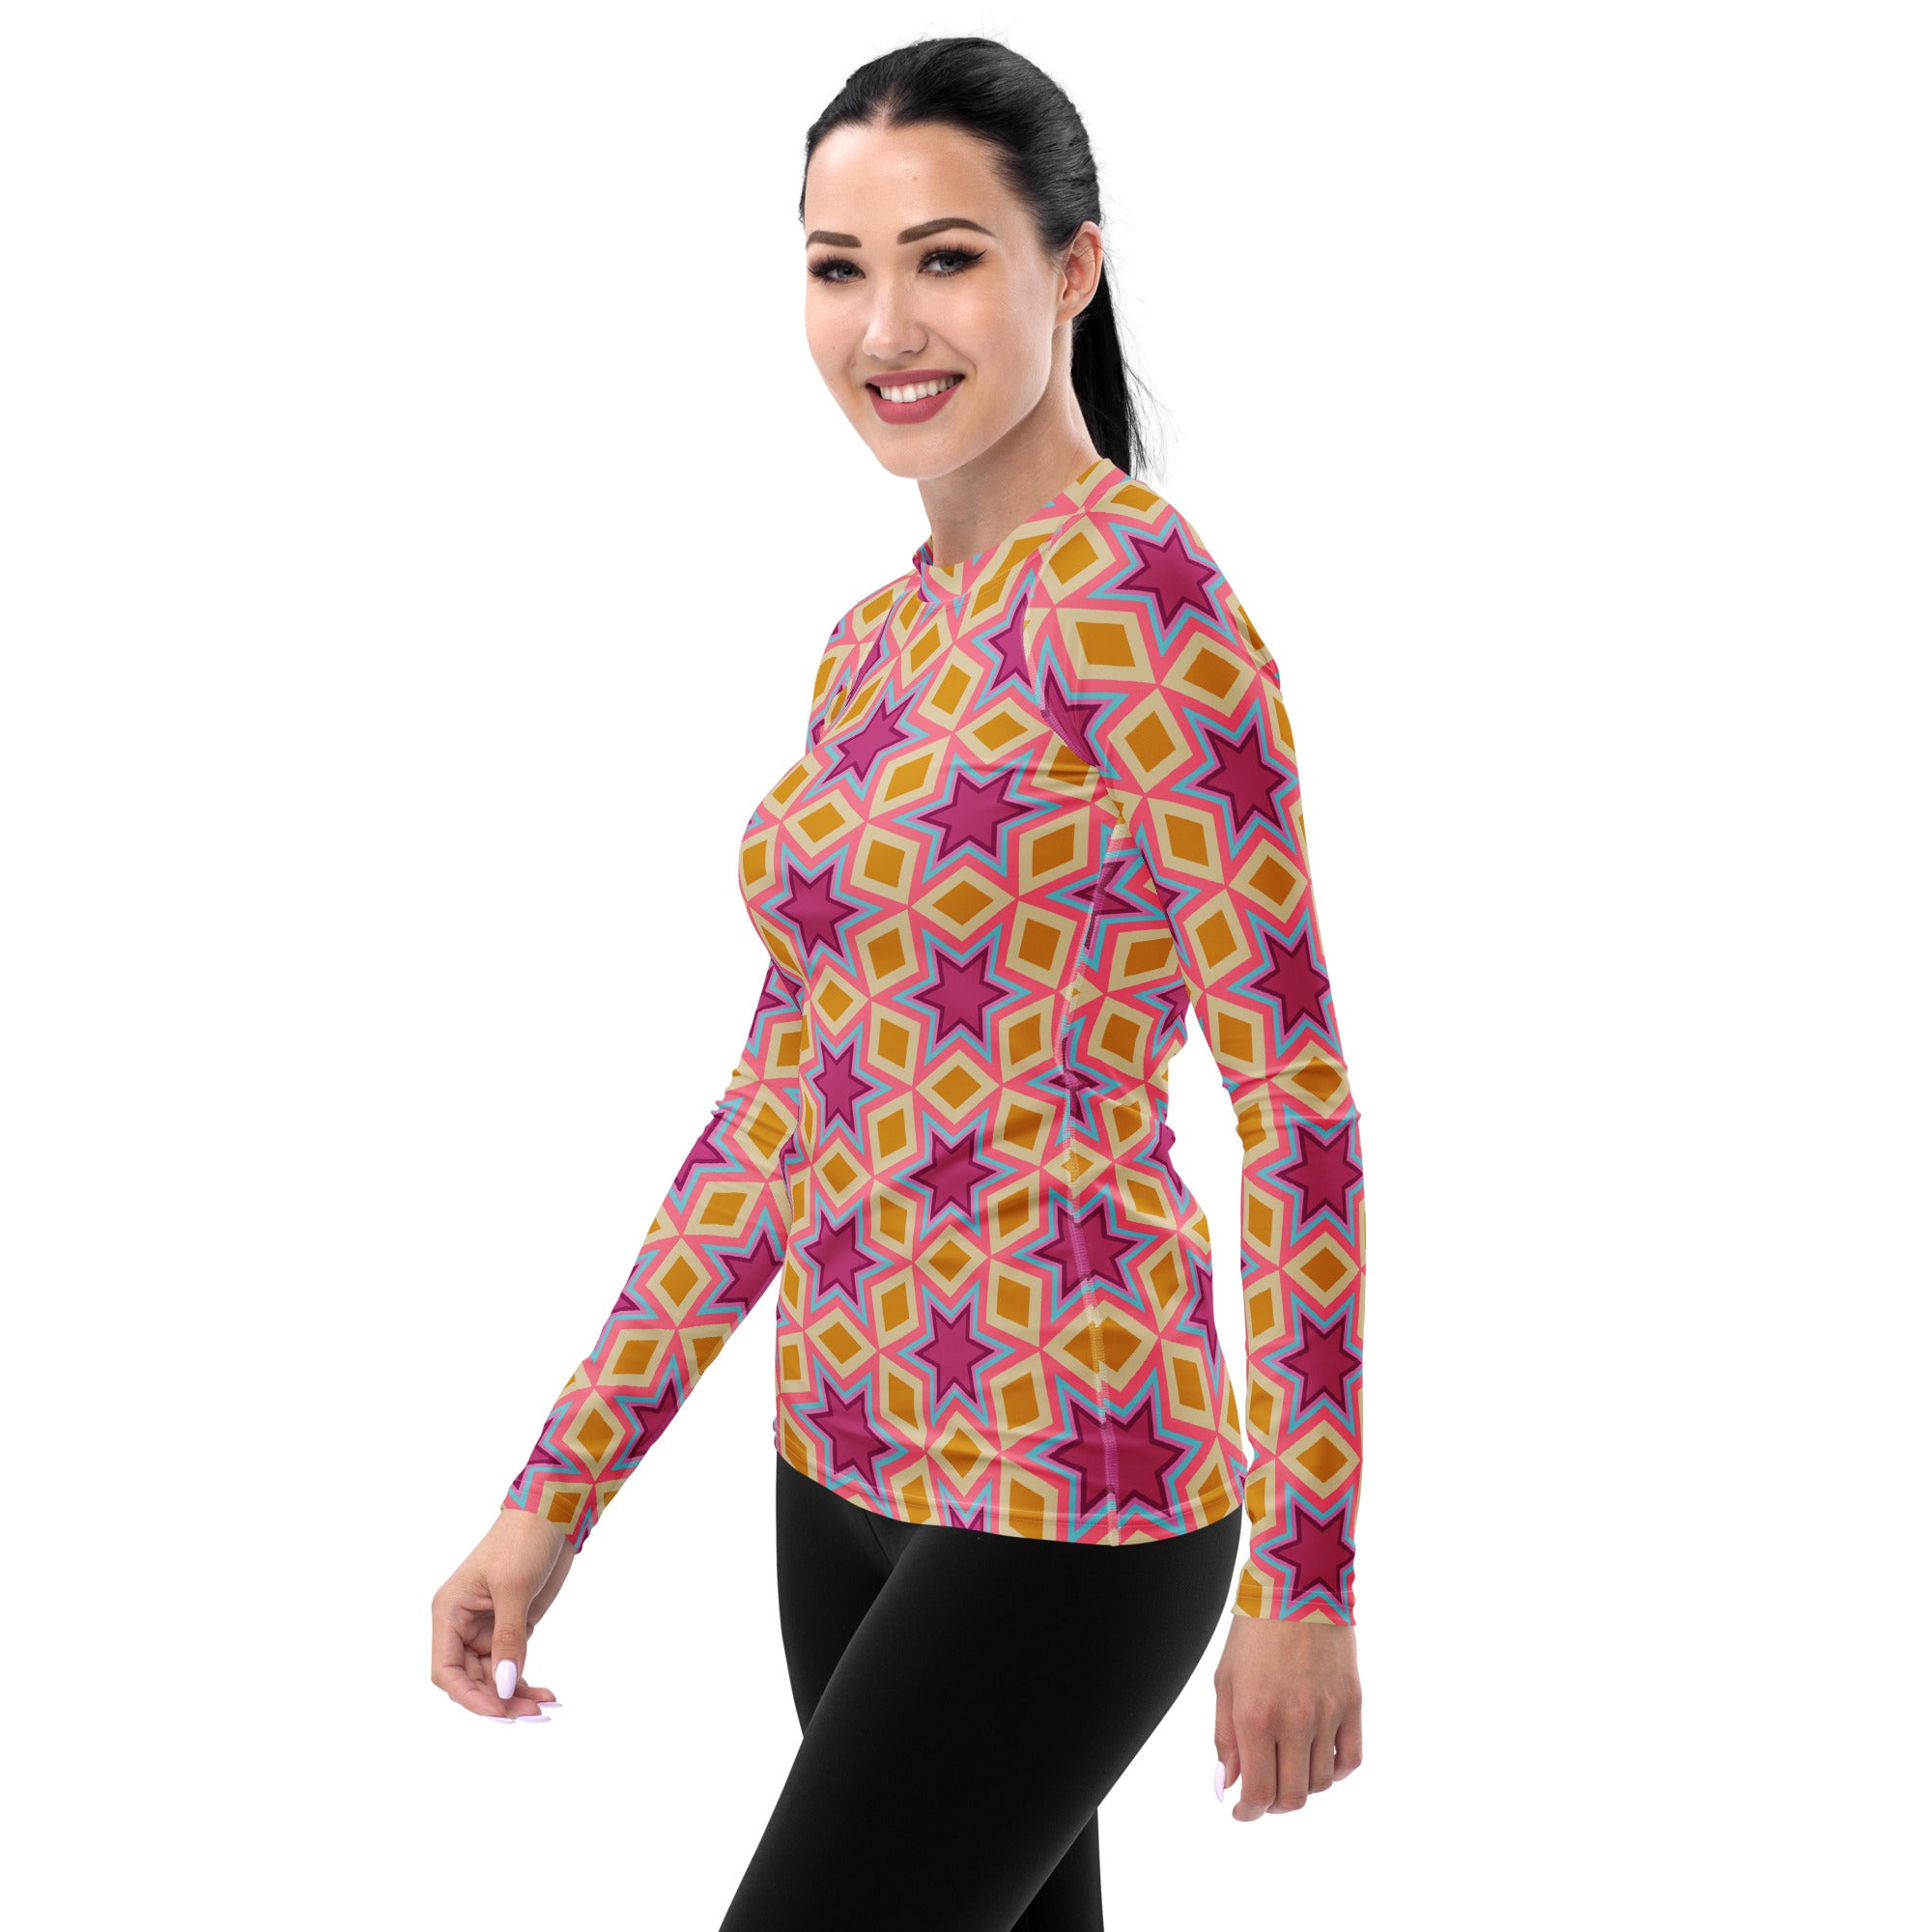 Protective paisley rash guard for women water sports